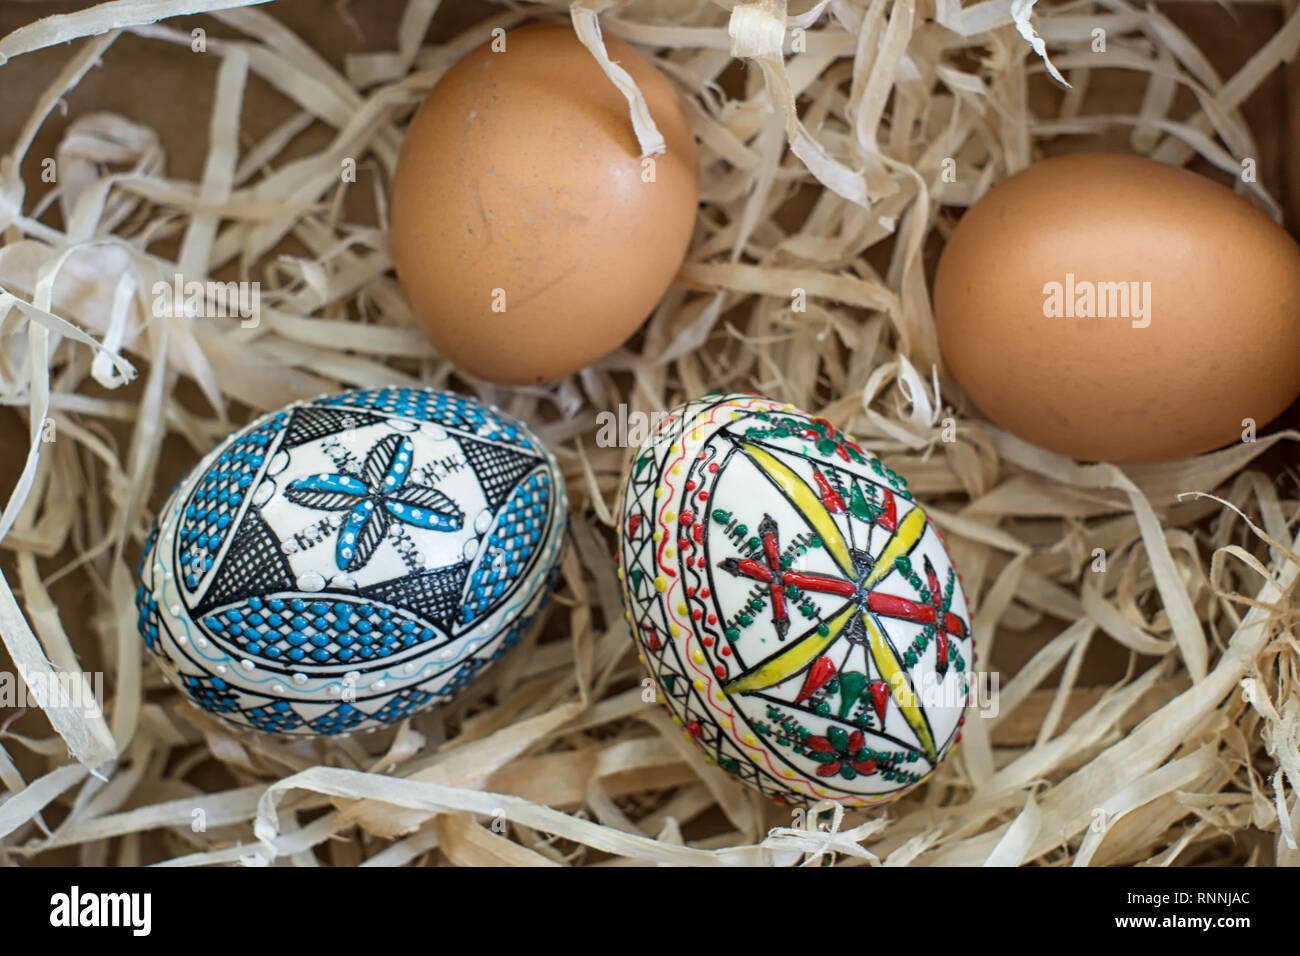 Two decorated easter eggs and two fresh organic eggs on straw Stock Photo